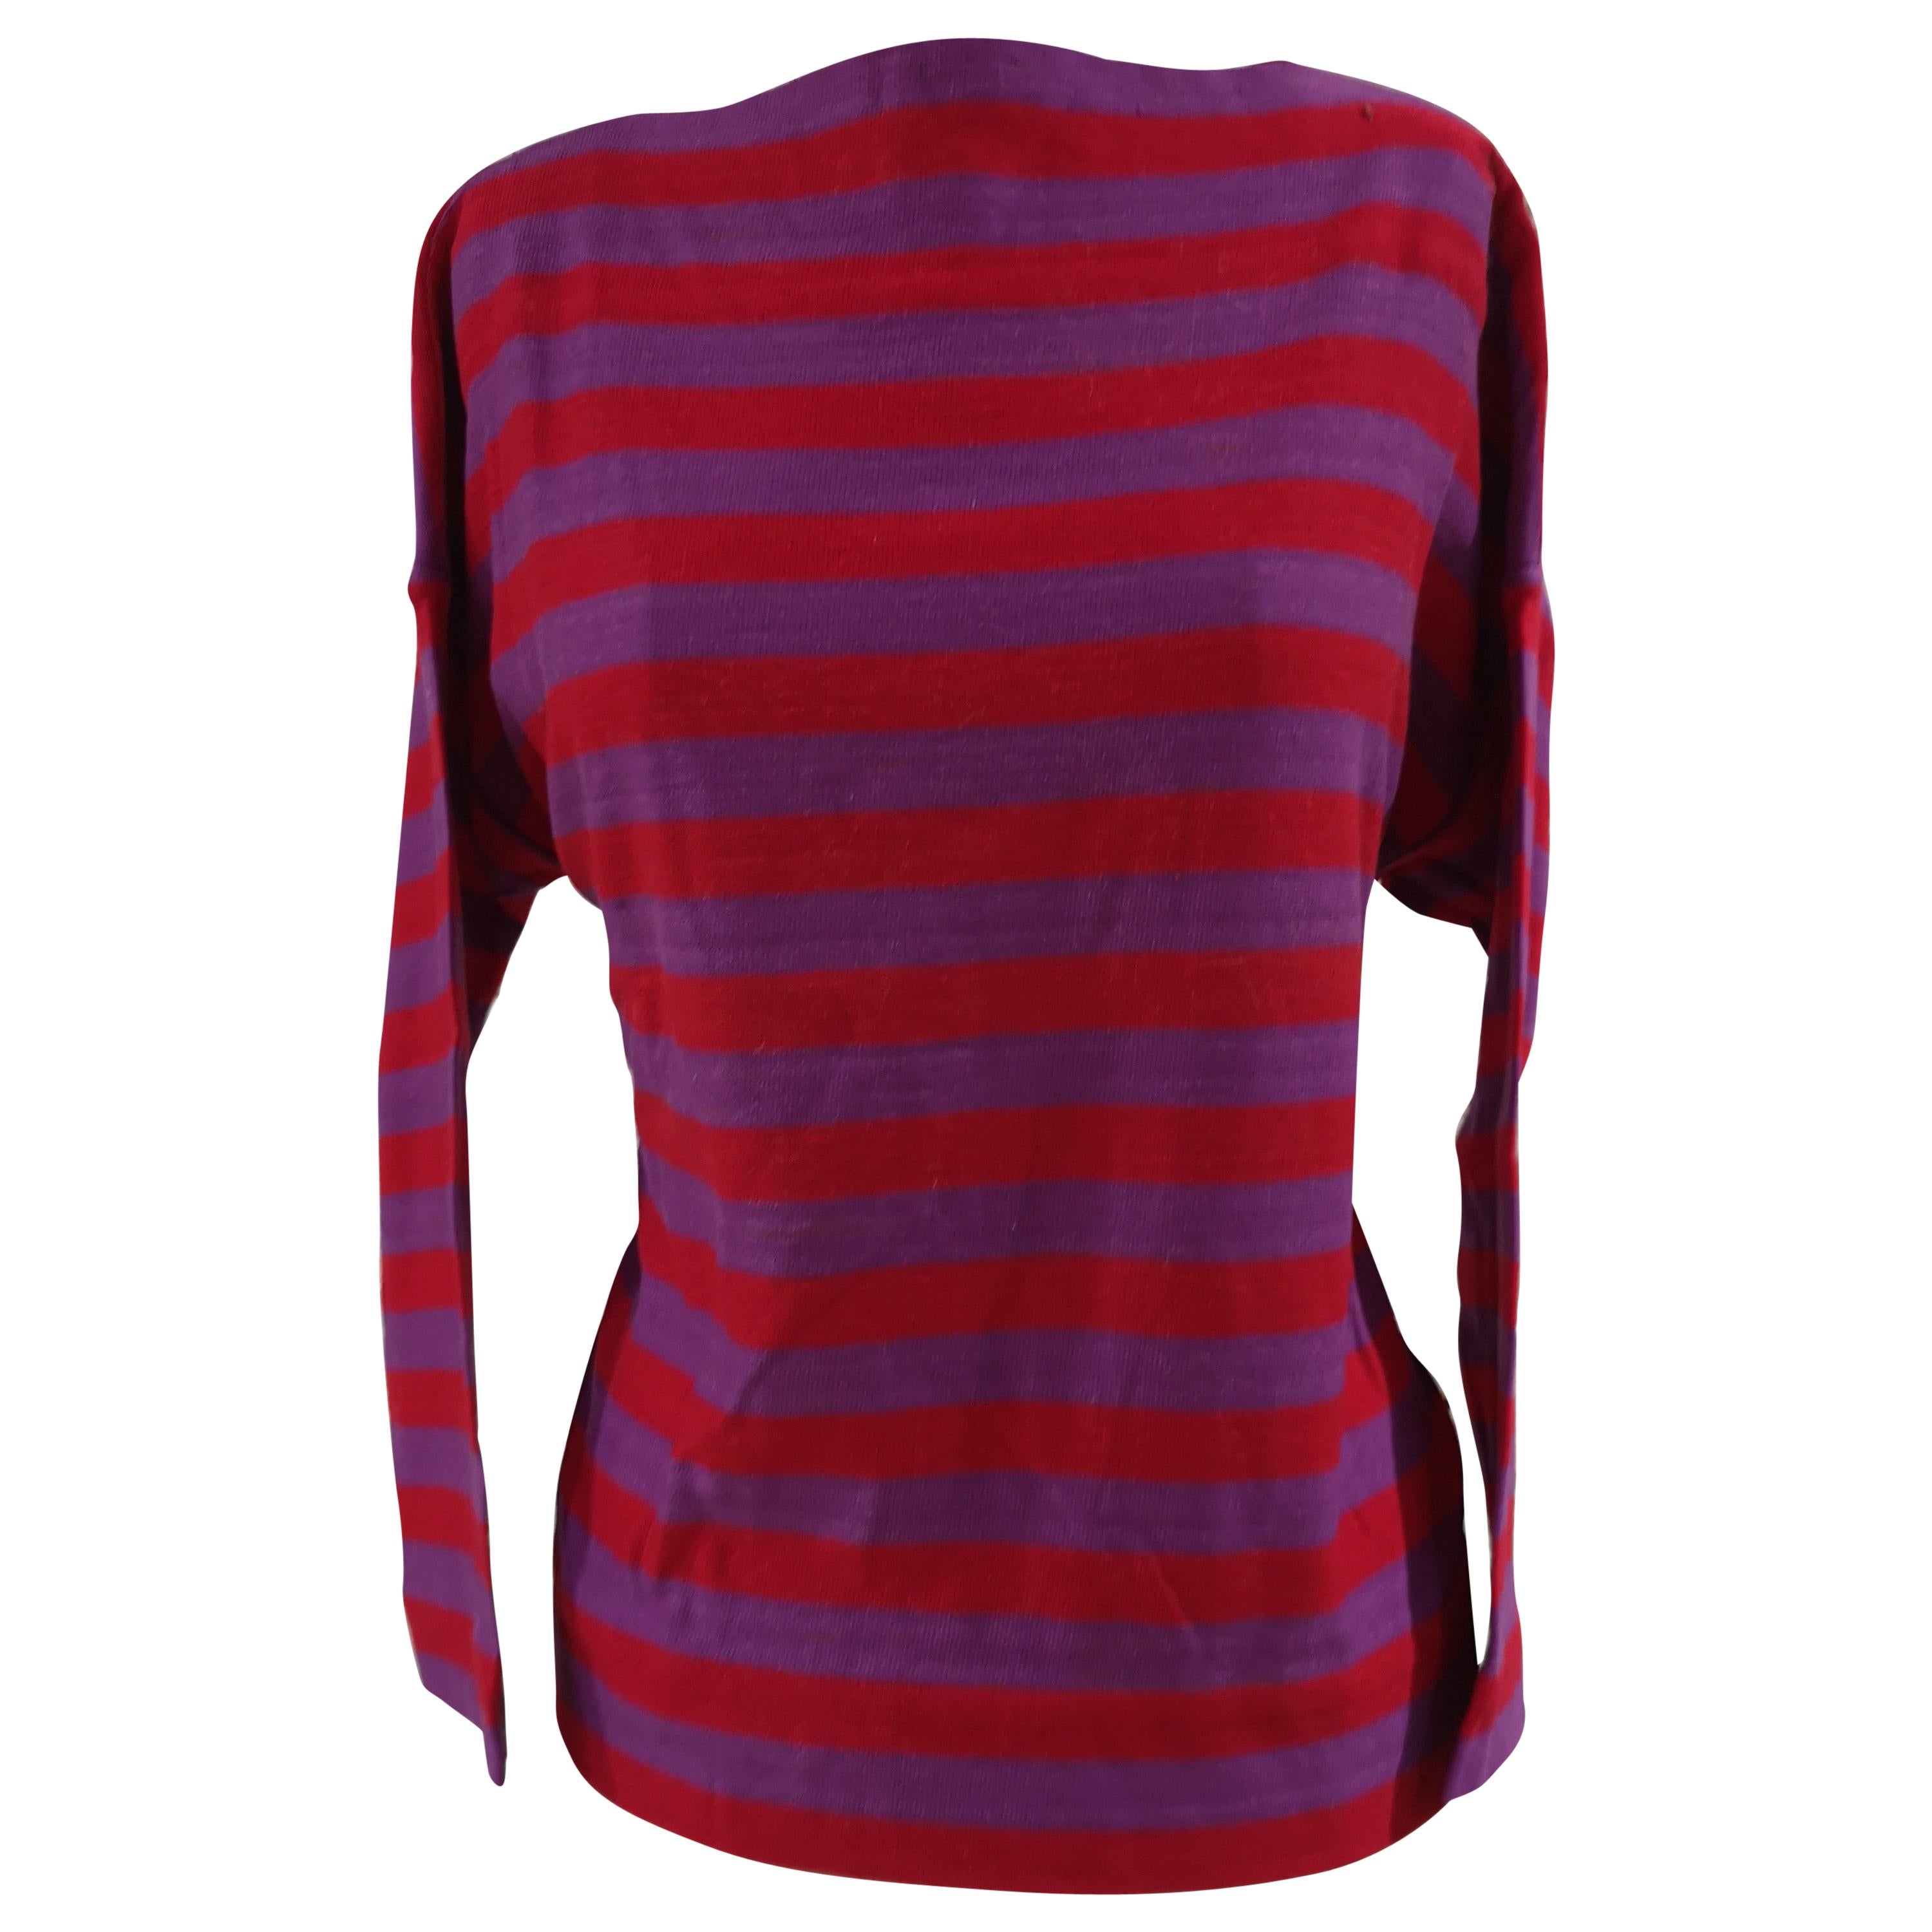 Vintage red and purple stripes t-shirt sweater